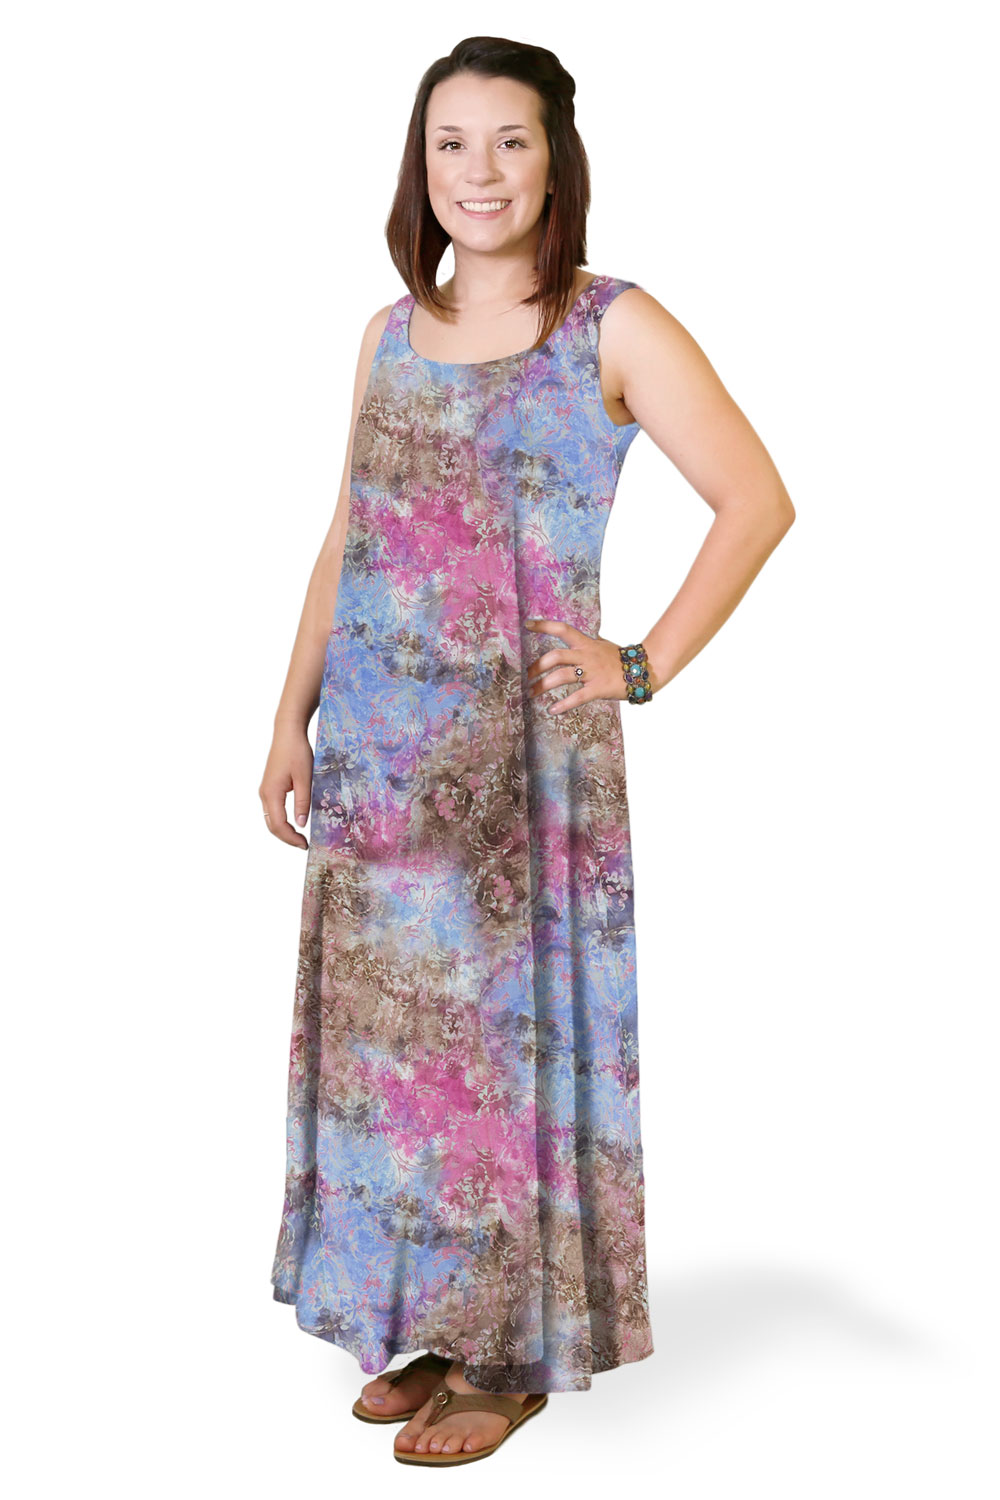 Hary Dary Long Strap Dress Pink and Blue 